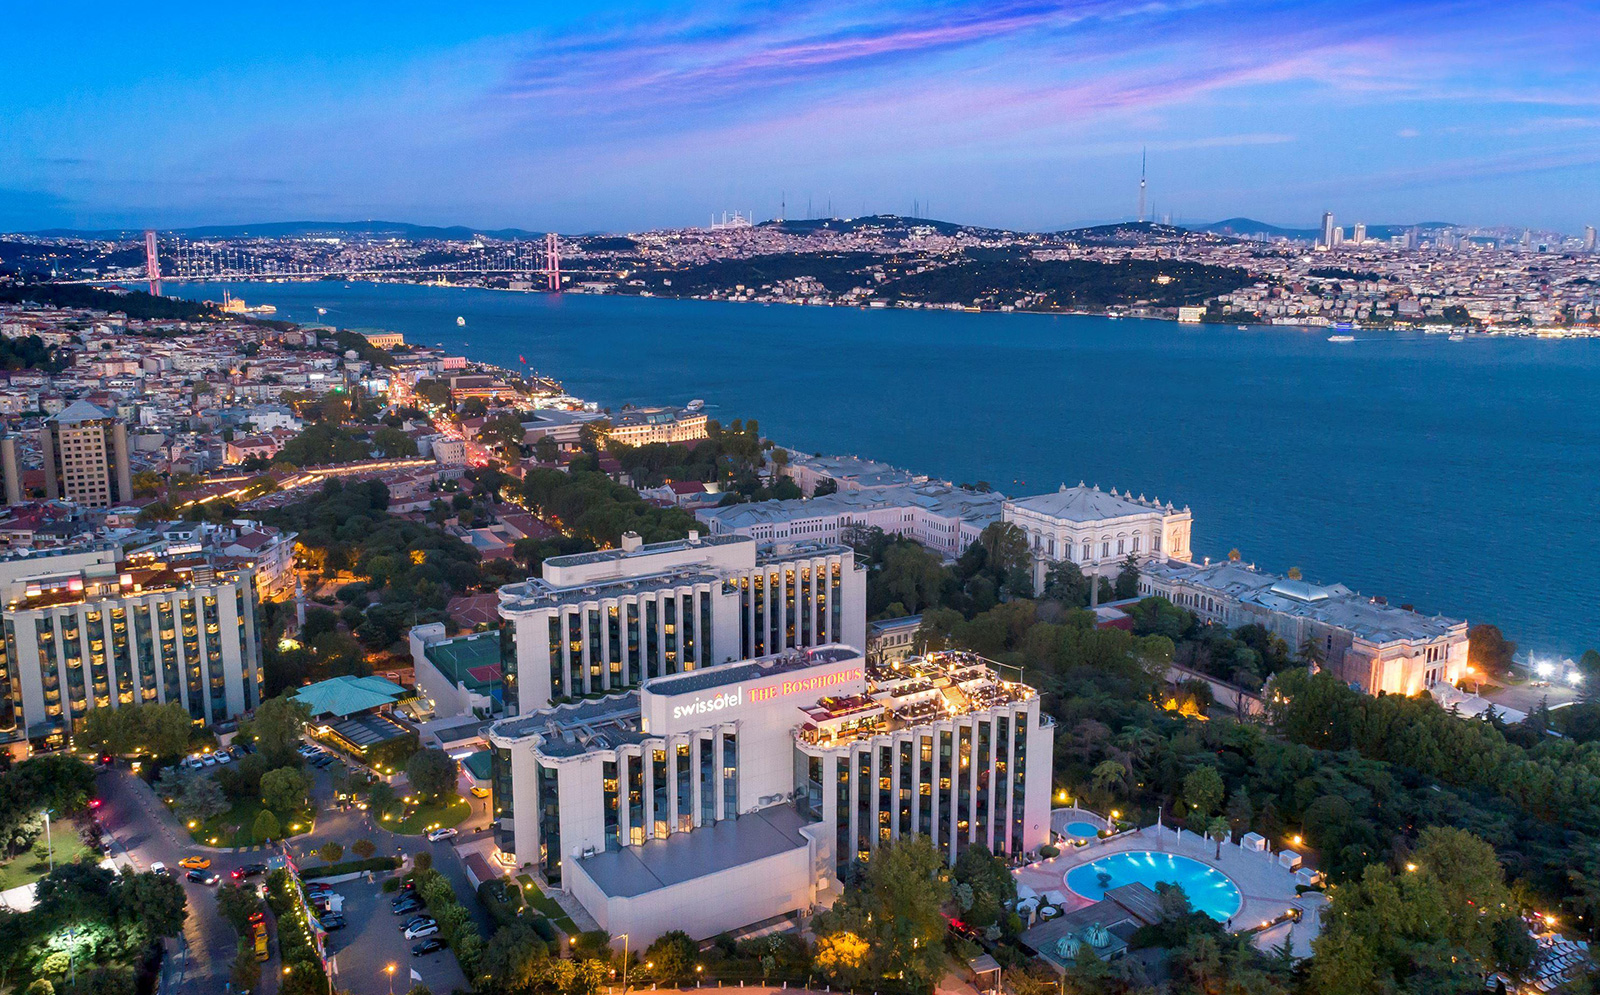 swissotel-istanbul-gallery-fly-to-blue (18)